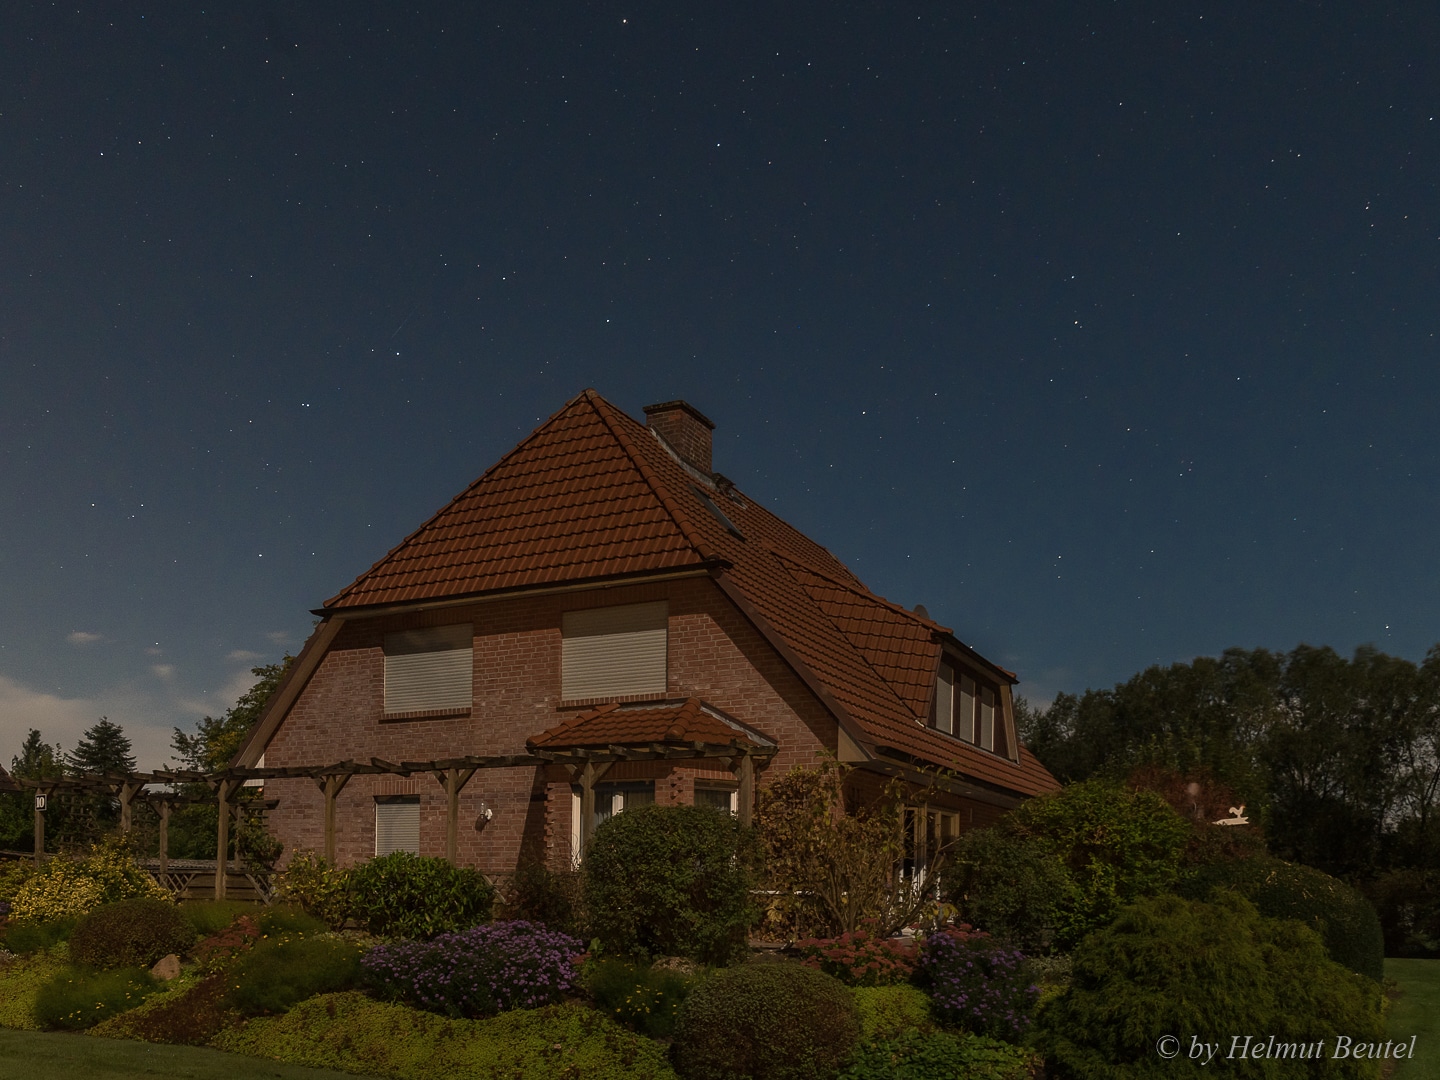 Starry night at home